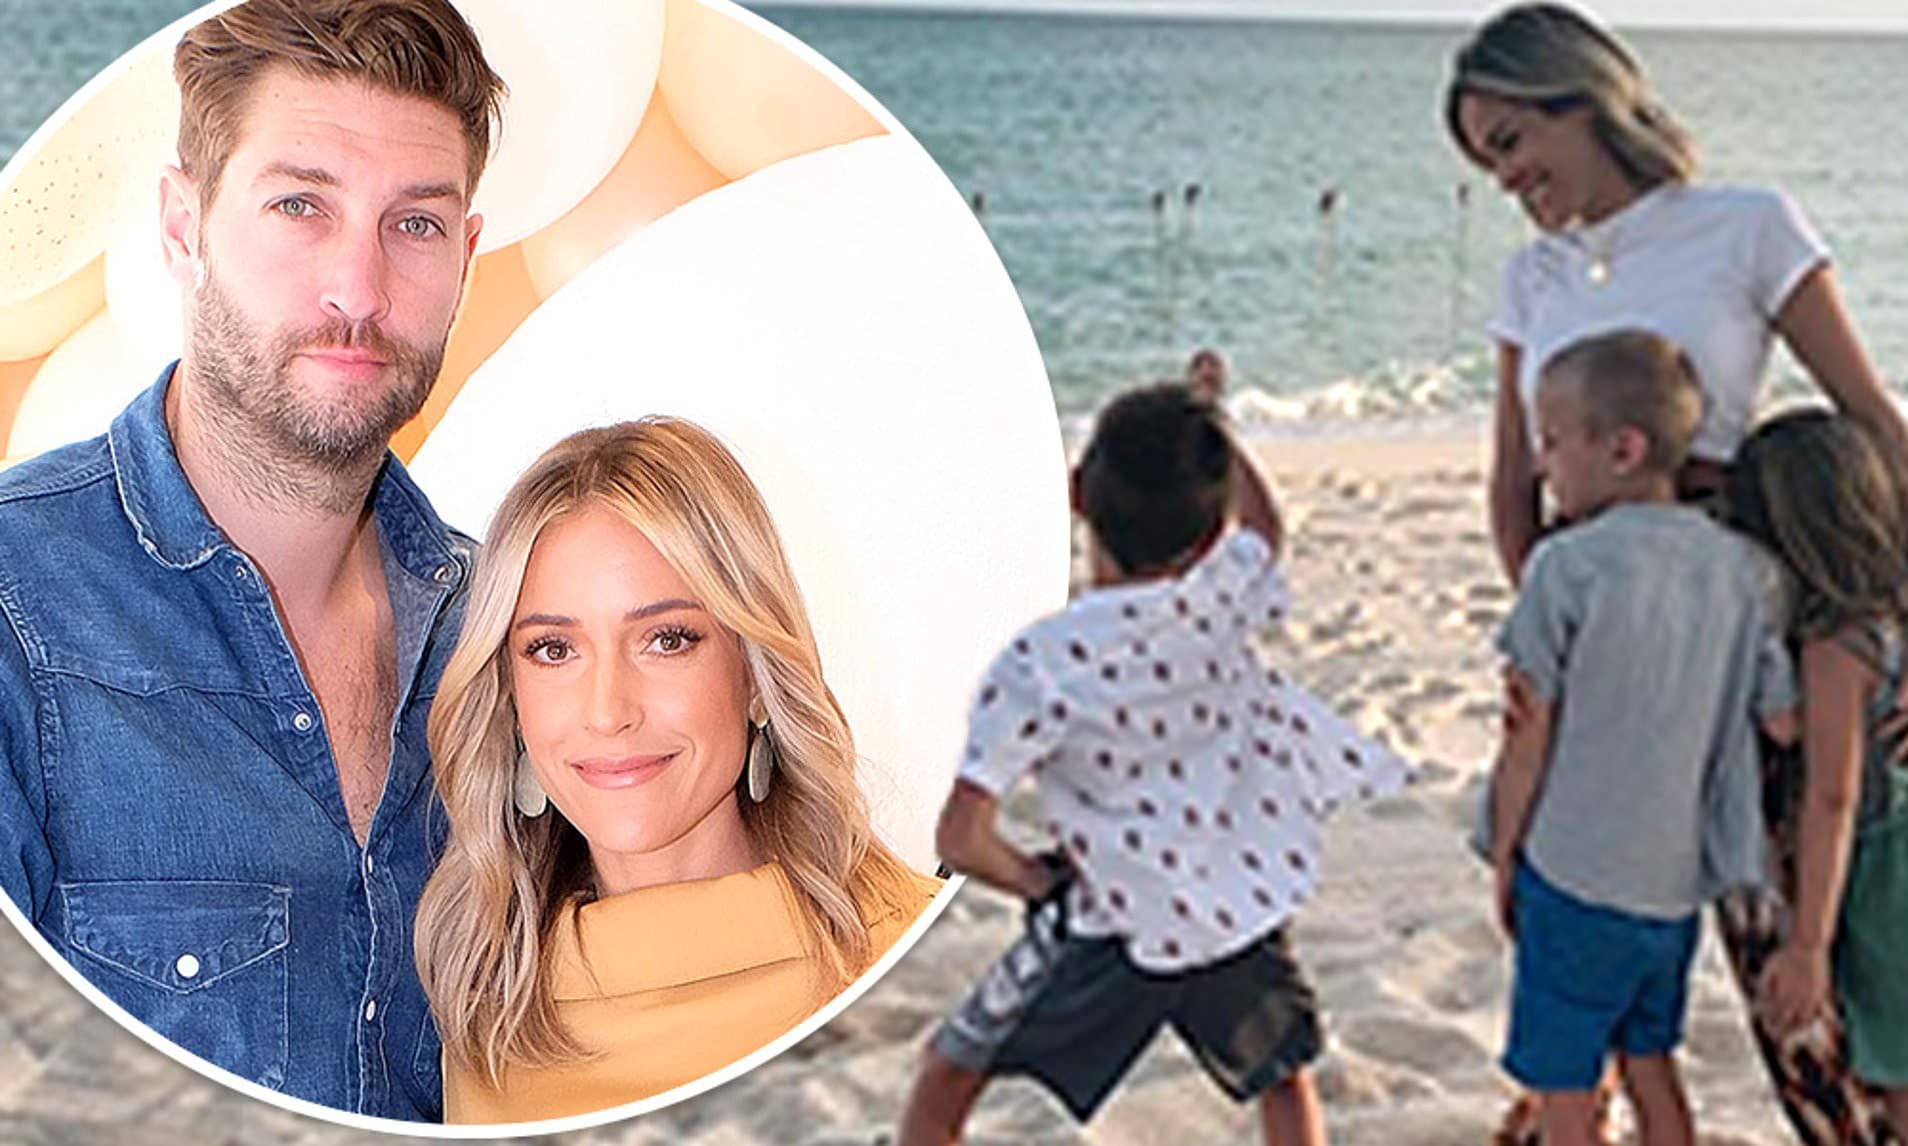 kristin-cavallari-opens-up-about-co-parenting-with-jay-cutler-heres-what-really-works-for-them